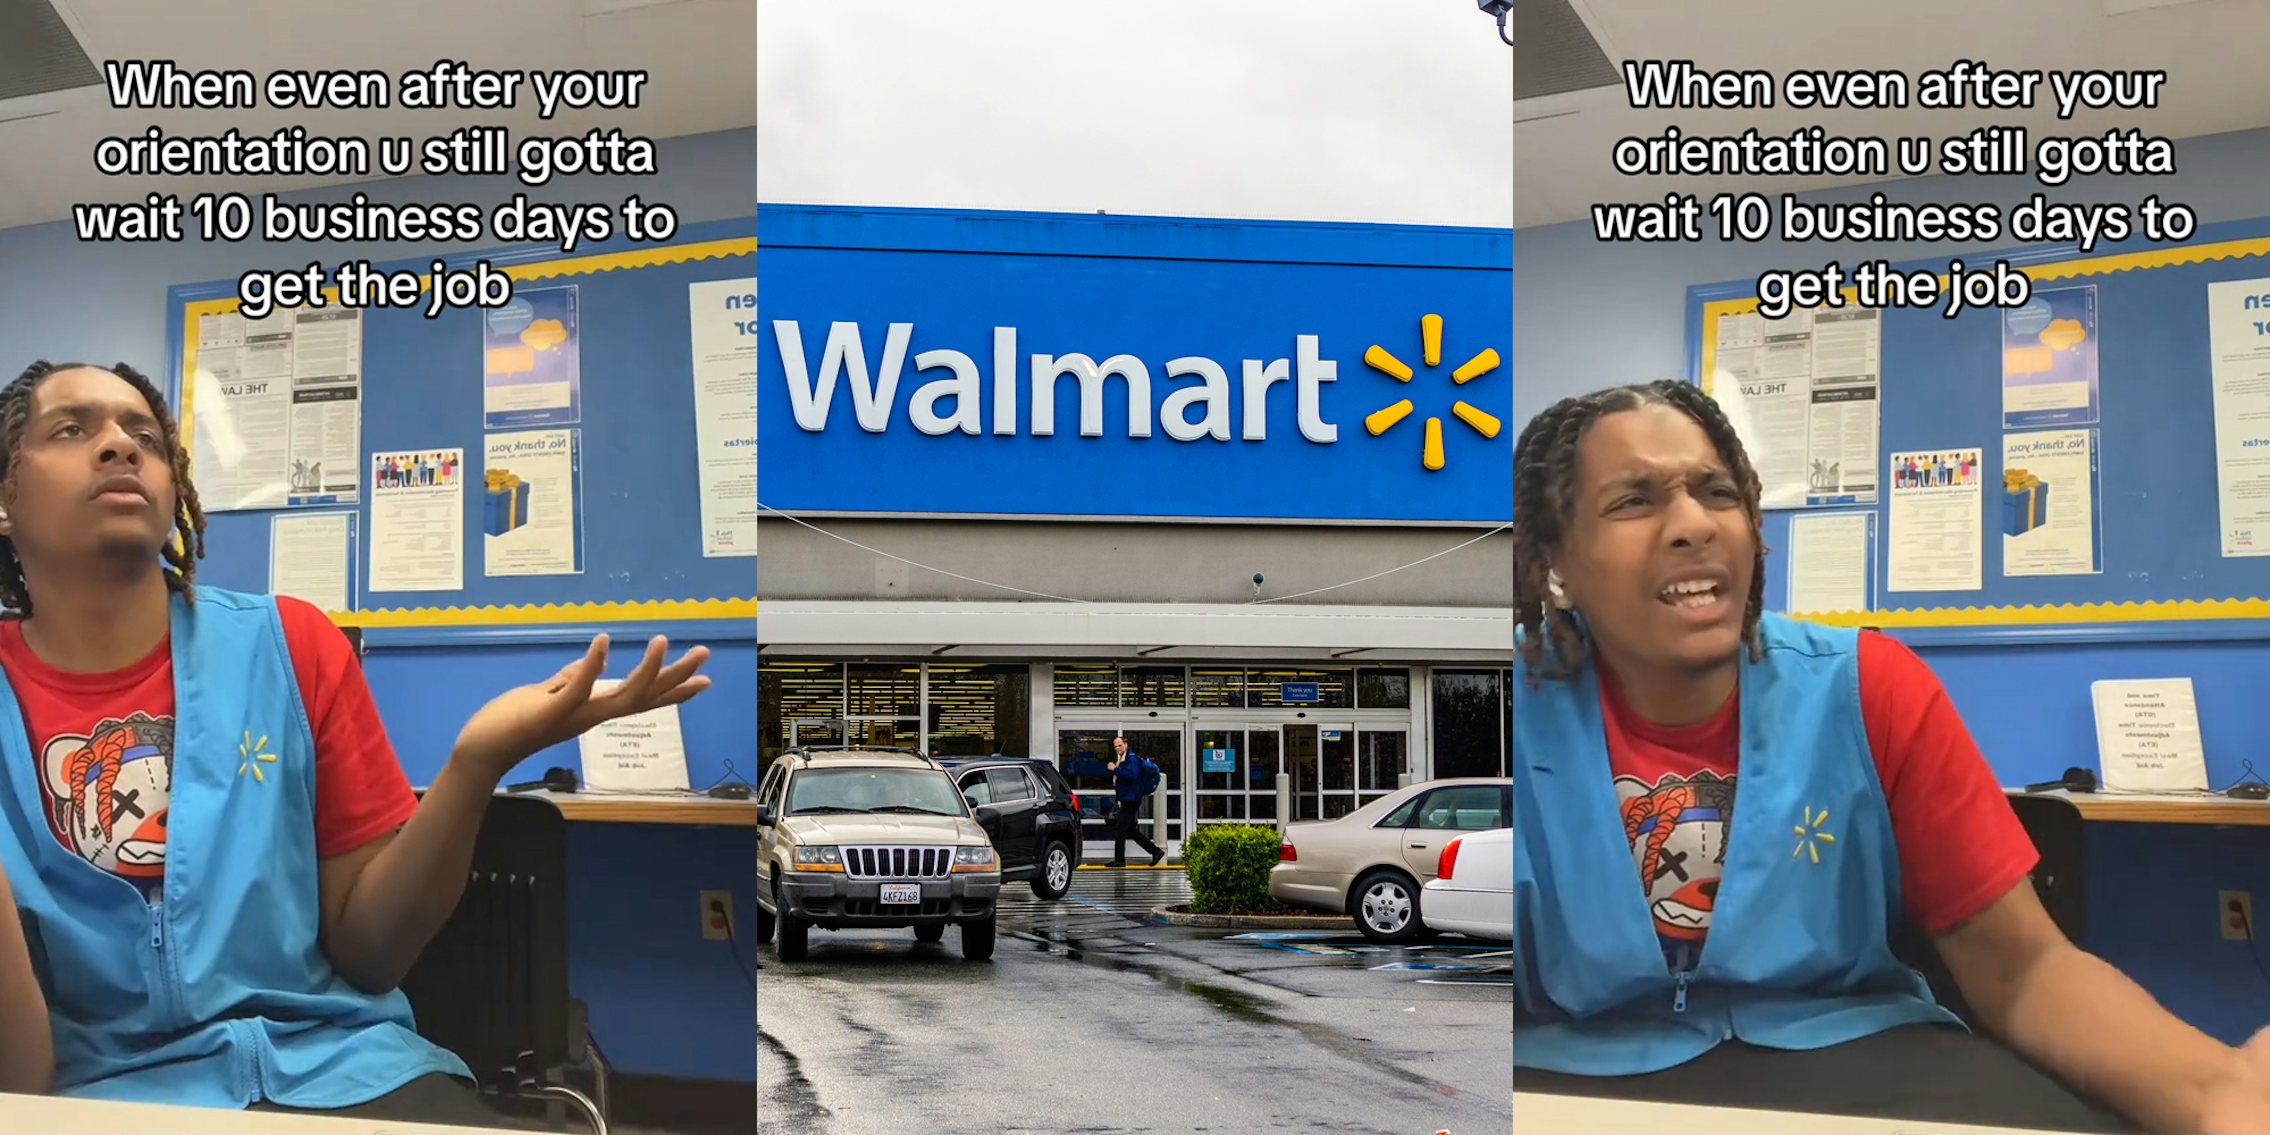 Walmart employee with caption 'When even after your orientation u still gotta wait 10 business days to get the job' (l) Walmart building with sign (c) Walmart employee with caption 'When even after your orientation u still gotta wait 10 business days to get the job' (r)